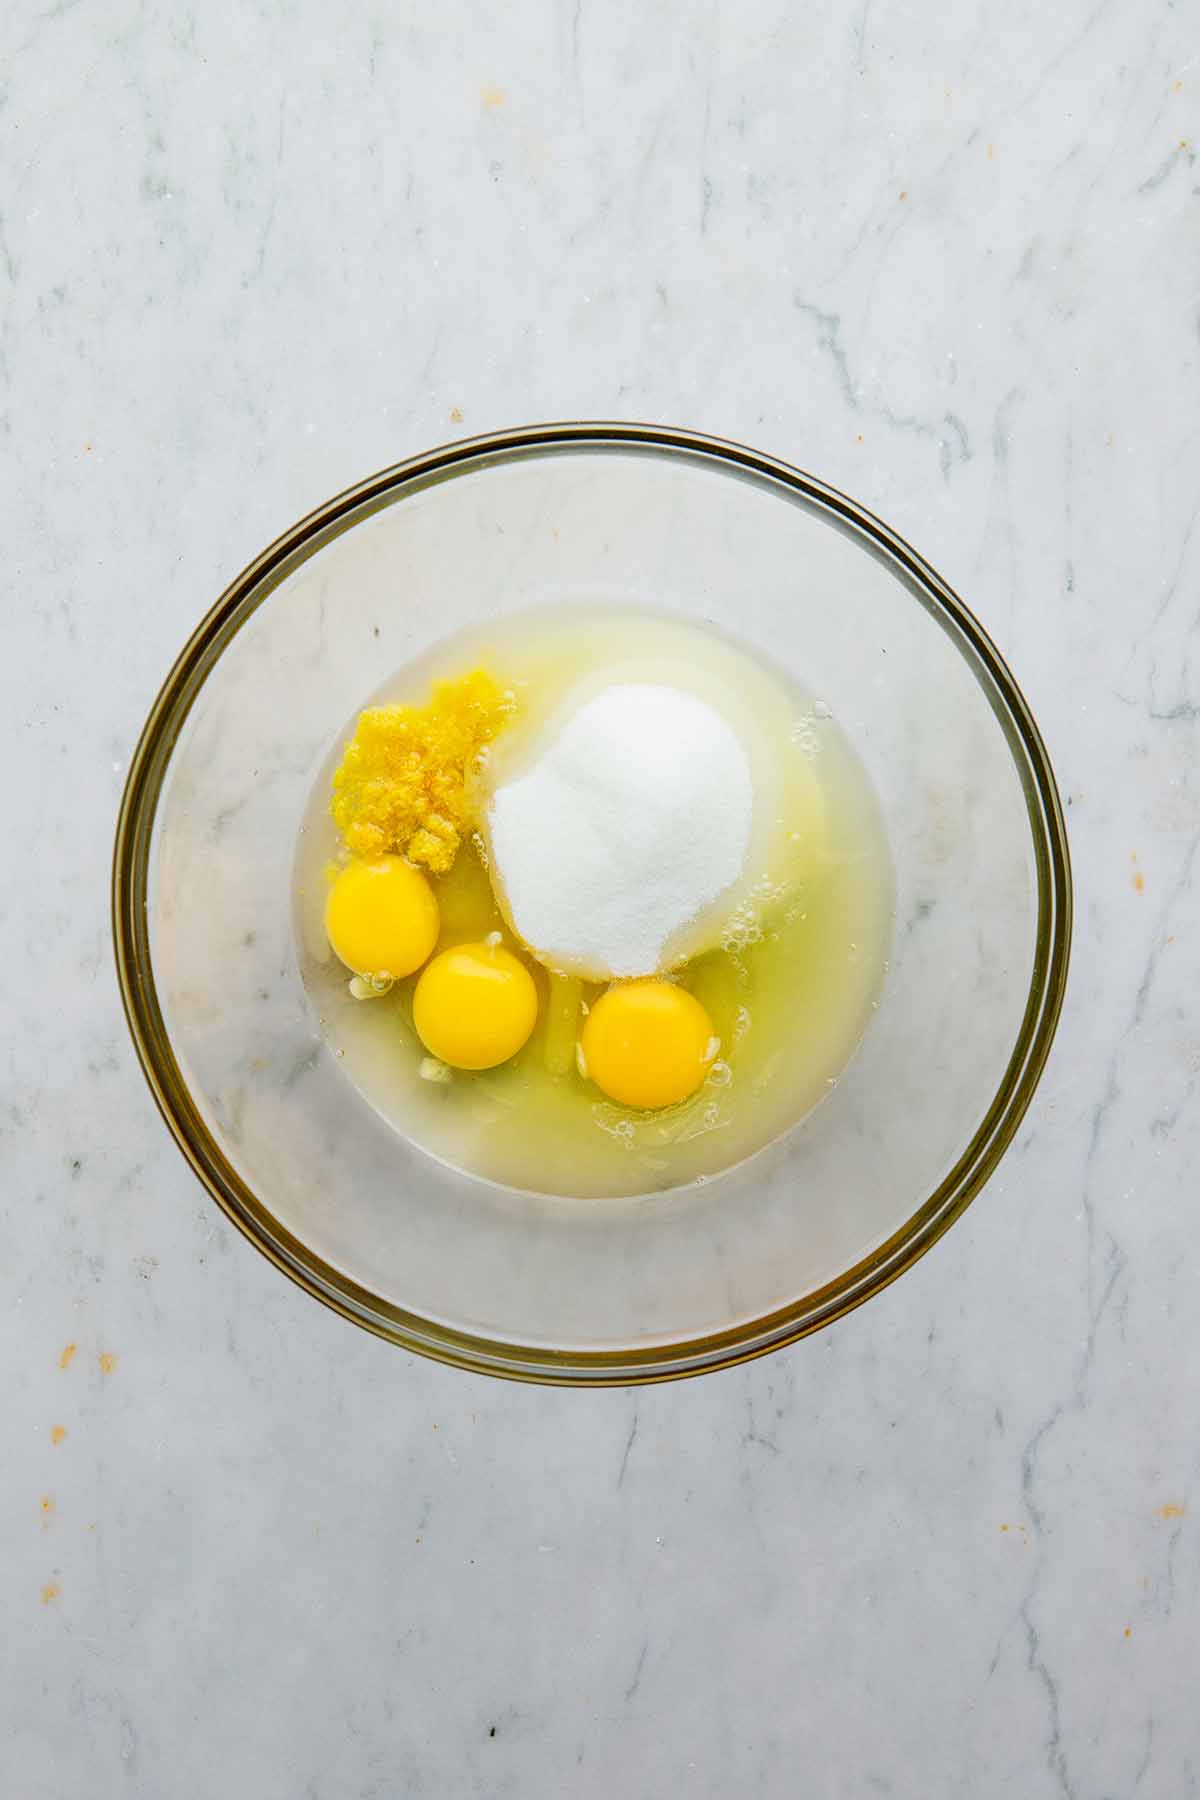 Eggs, lemon zest and juice, sugar, and salt in a large glass bowl.